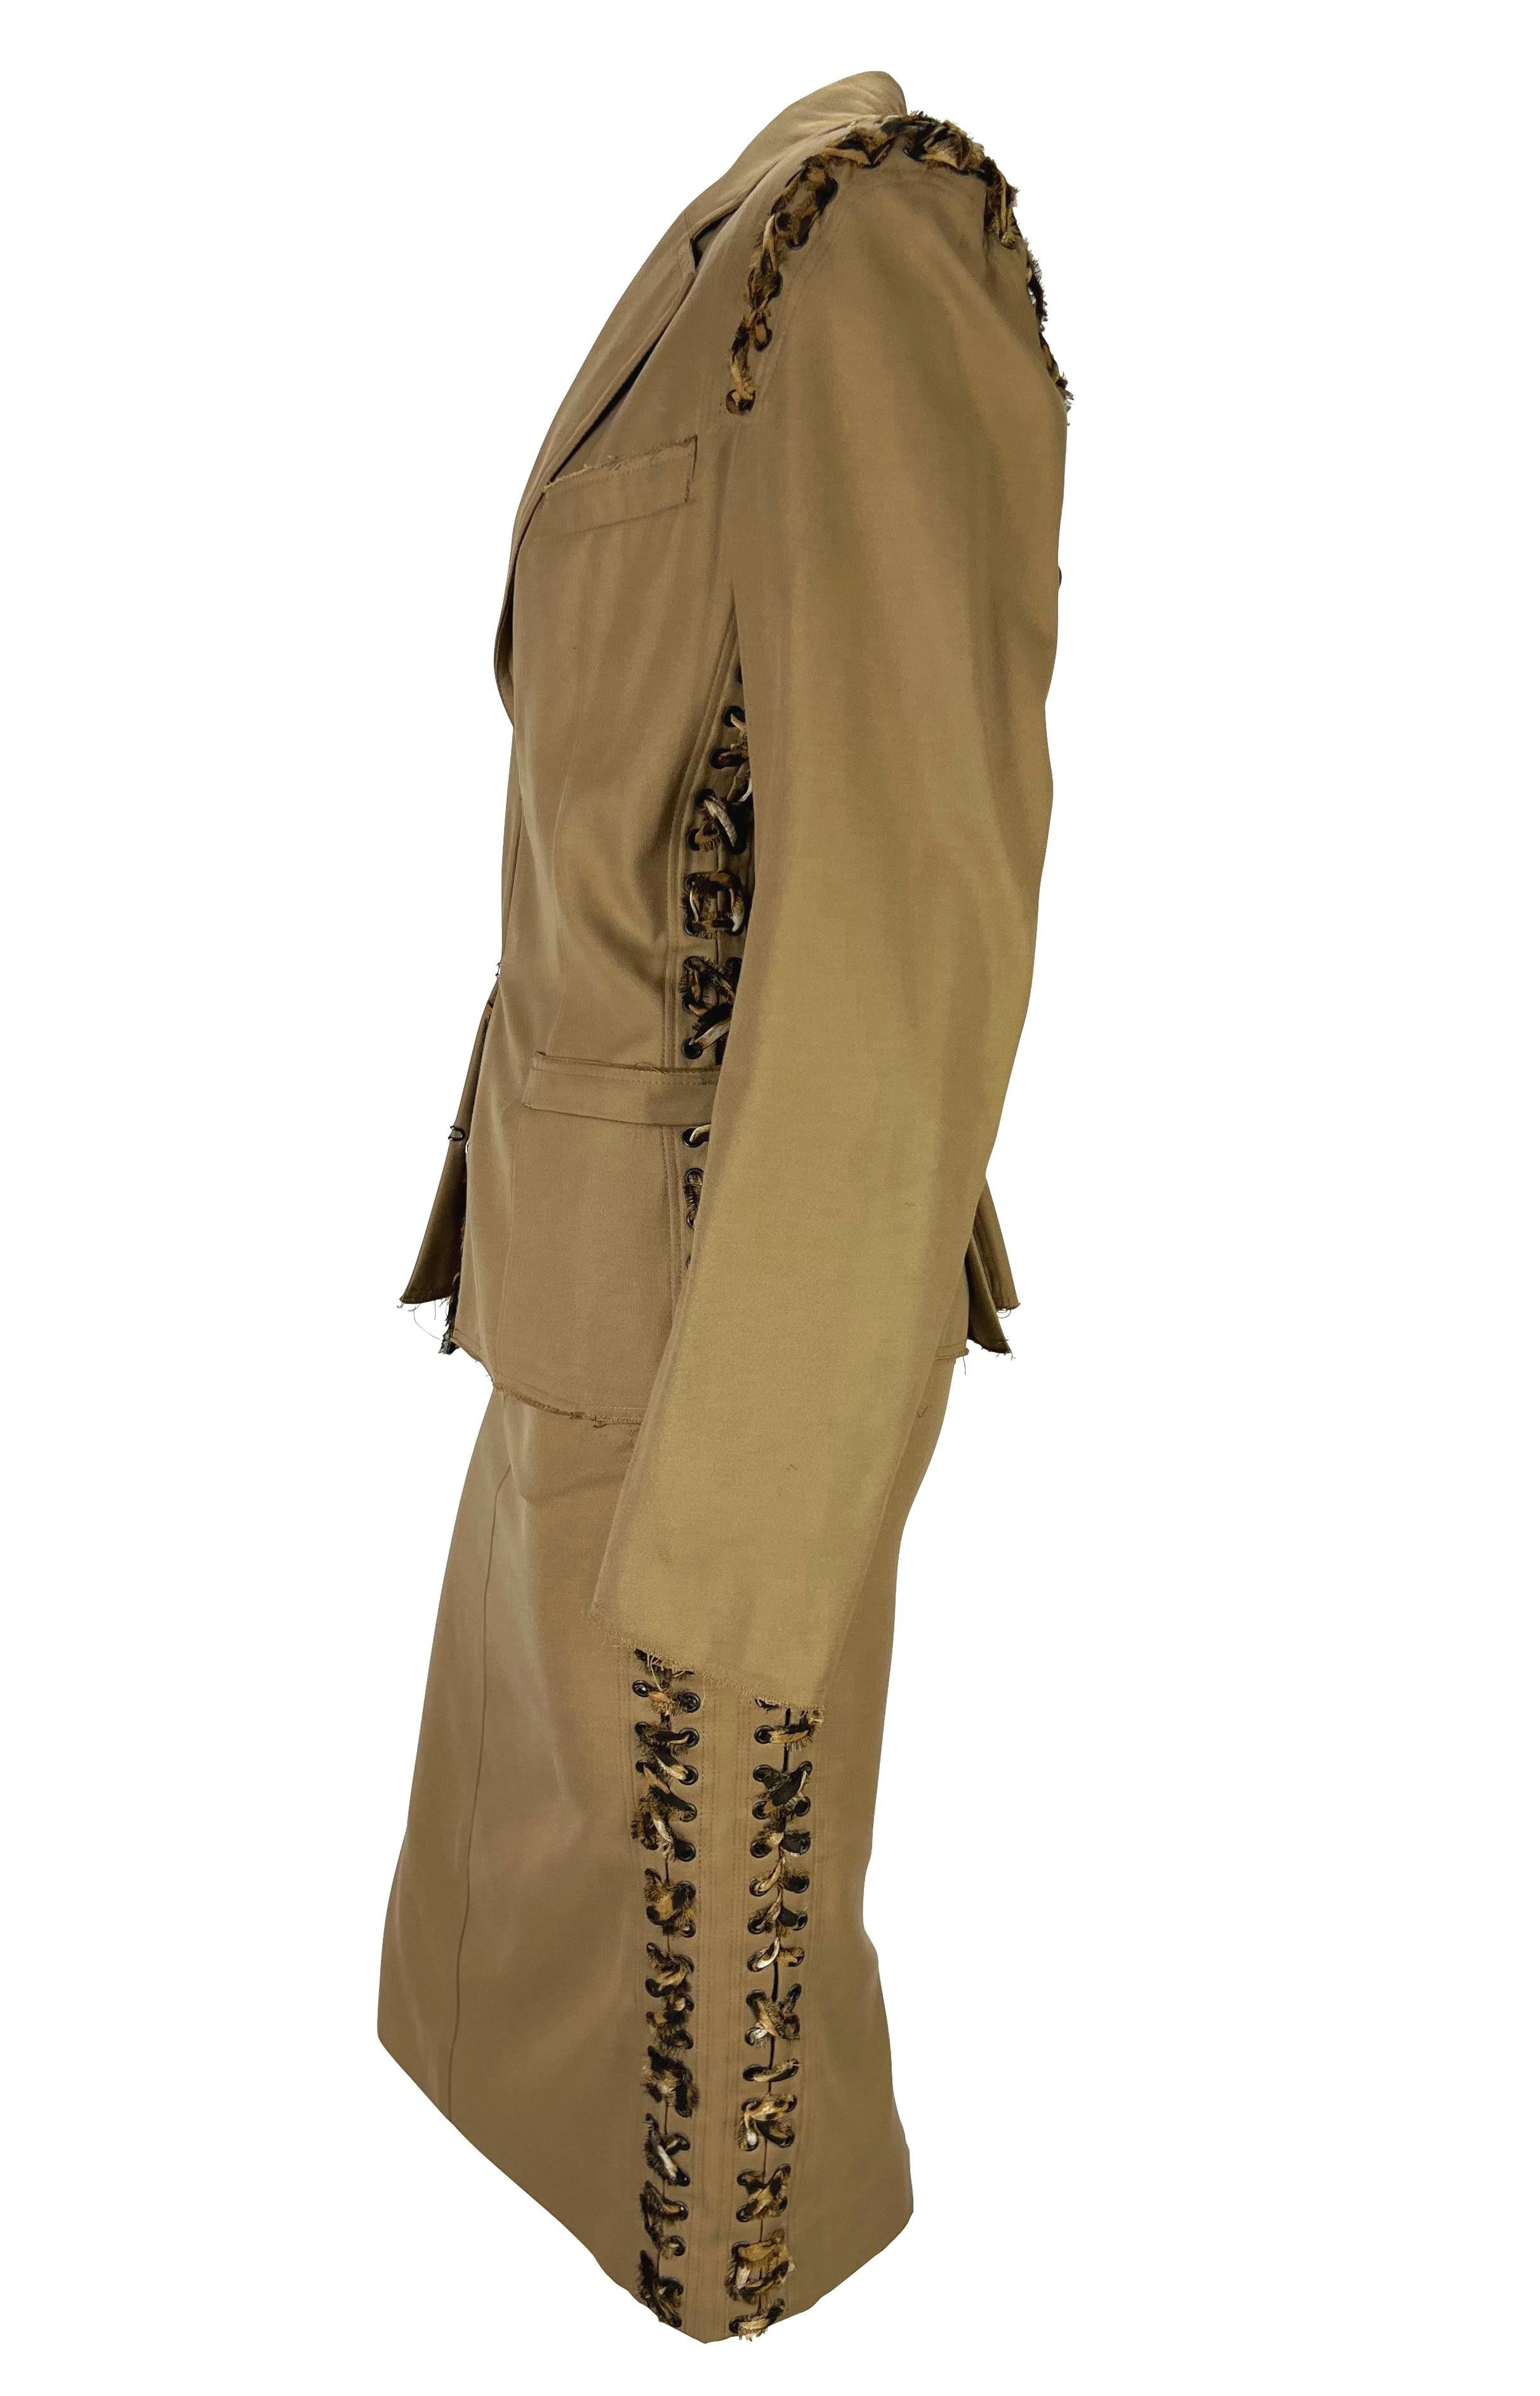 Brown S/S 2002 Yves Saint Laurent by Tom Ford Safari Cheetah Print Lace-Up Khaki Suit For Sale